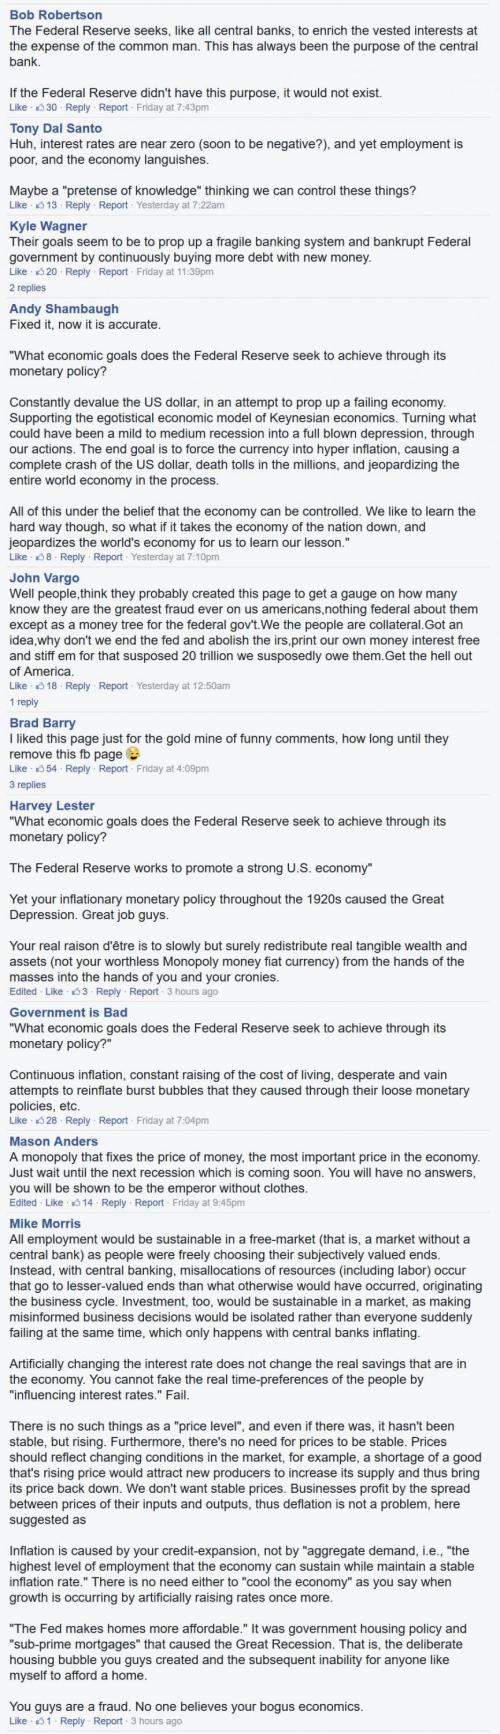 The Federal Reserve starts a Facebook page